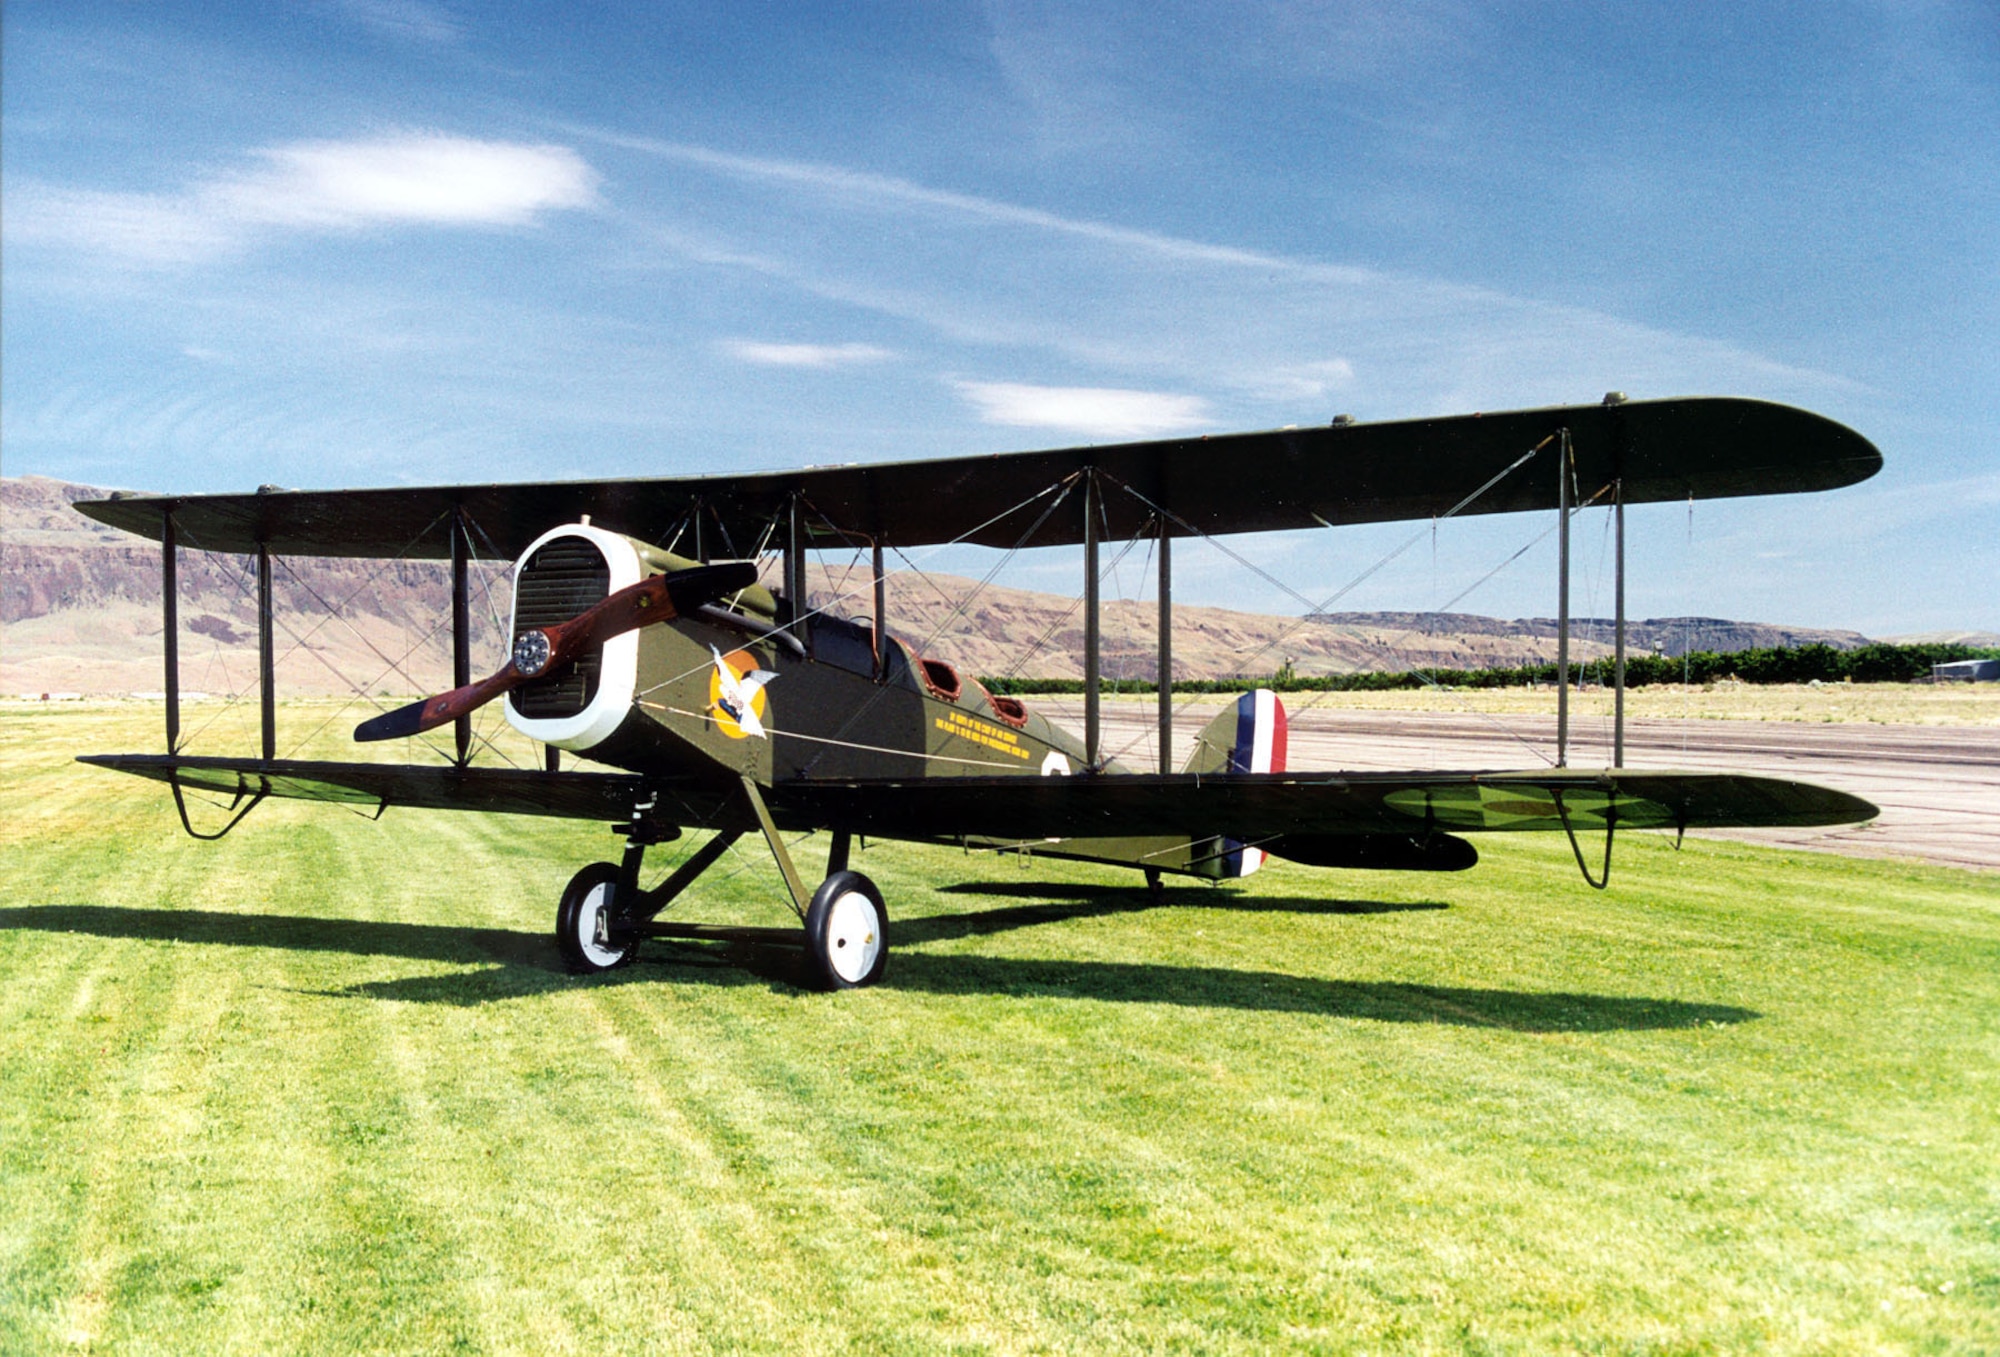 DAYTON, Ohio -- De Havilland DH-4 at the National Museum of the United States Air Force. (U.S. Air Force photo)